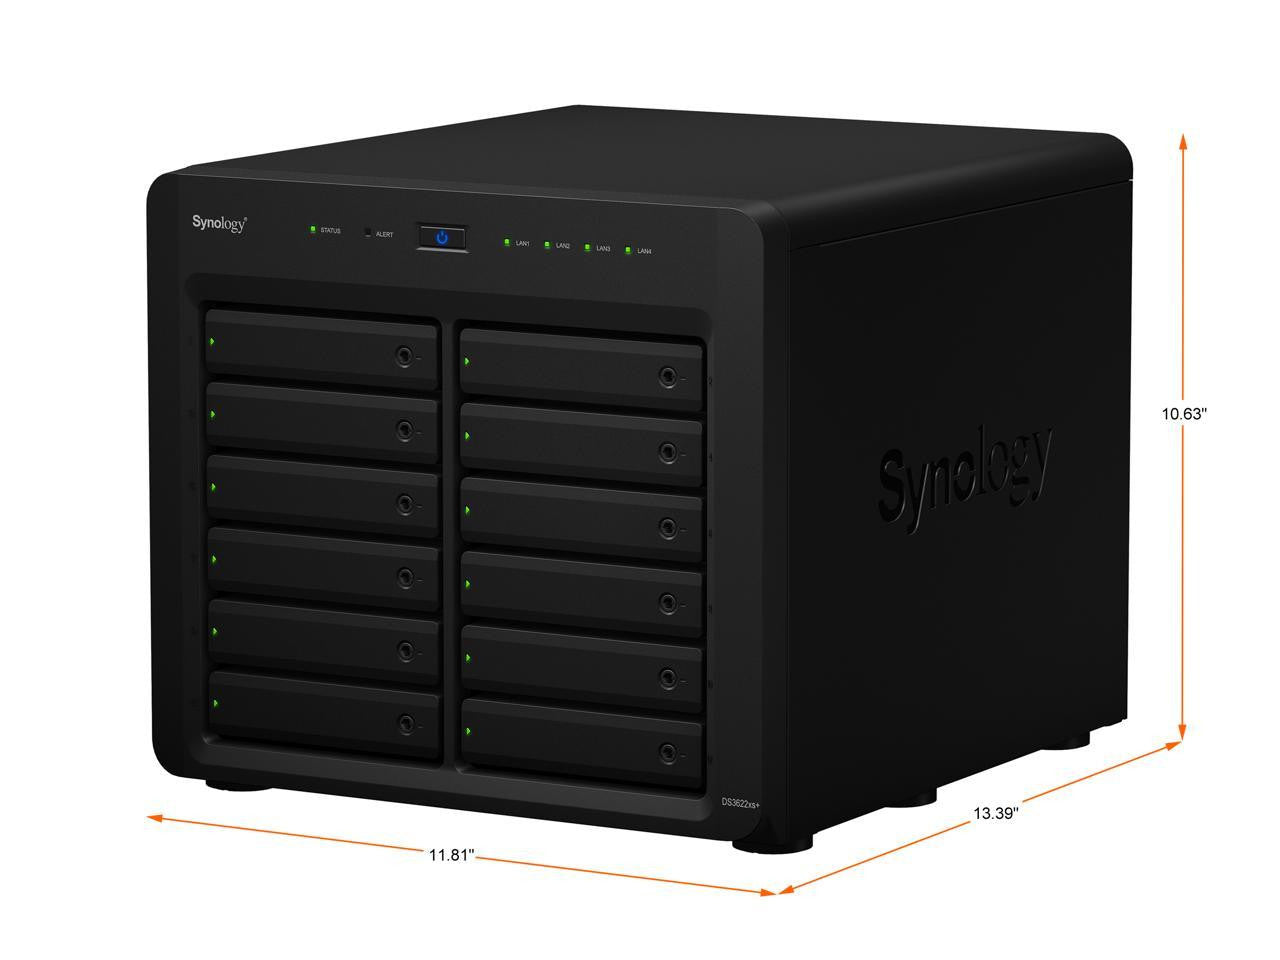 DS3622xs+ 12-BAY DiskStation with 48GB RAM and 96TB (12 x 8TB) of HAT5300 Synology Enterprise Drives